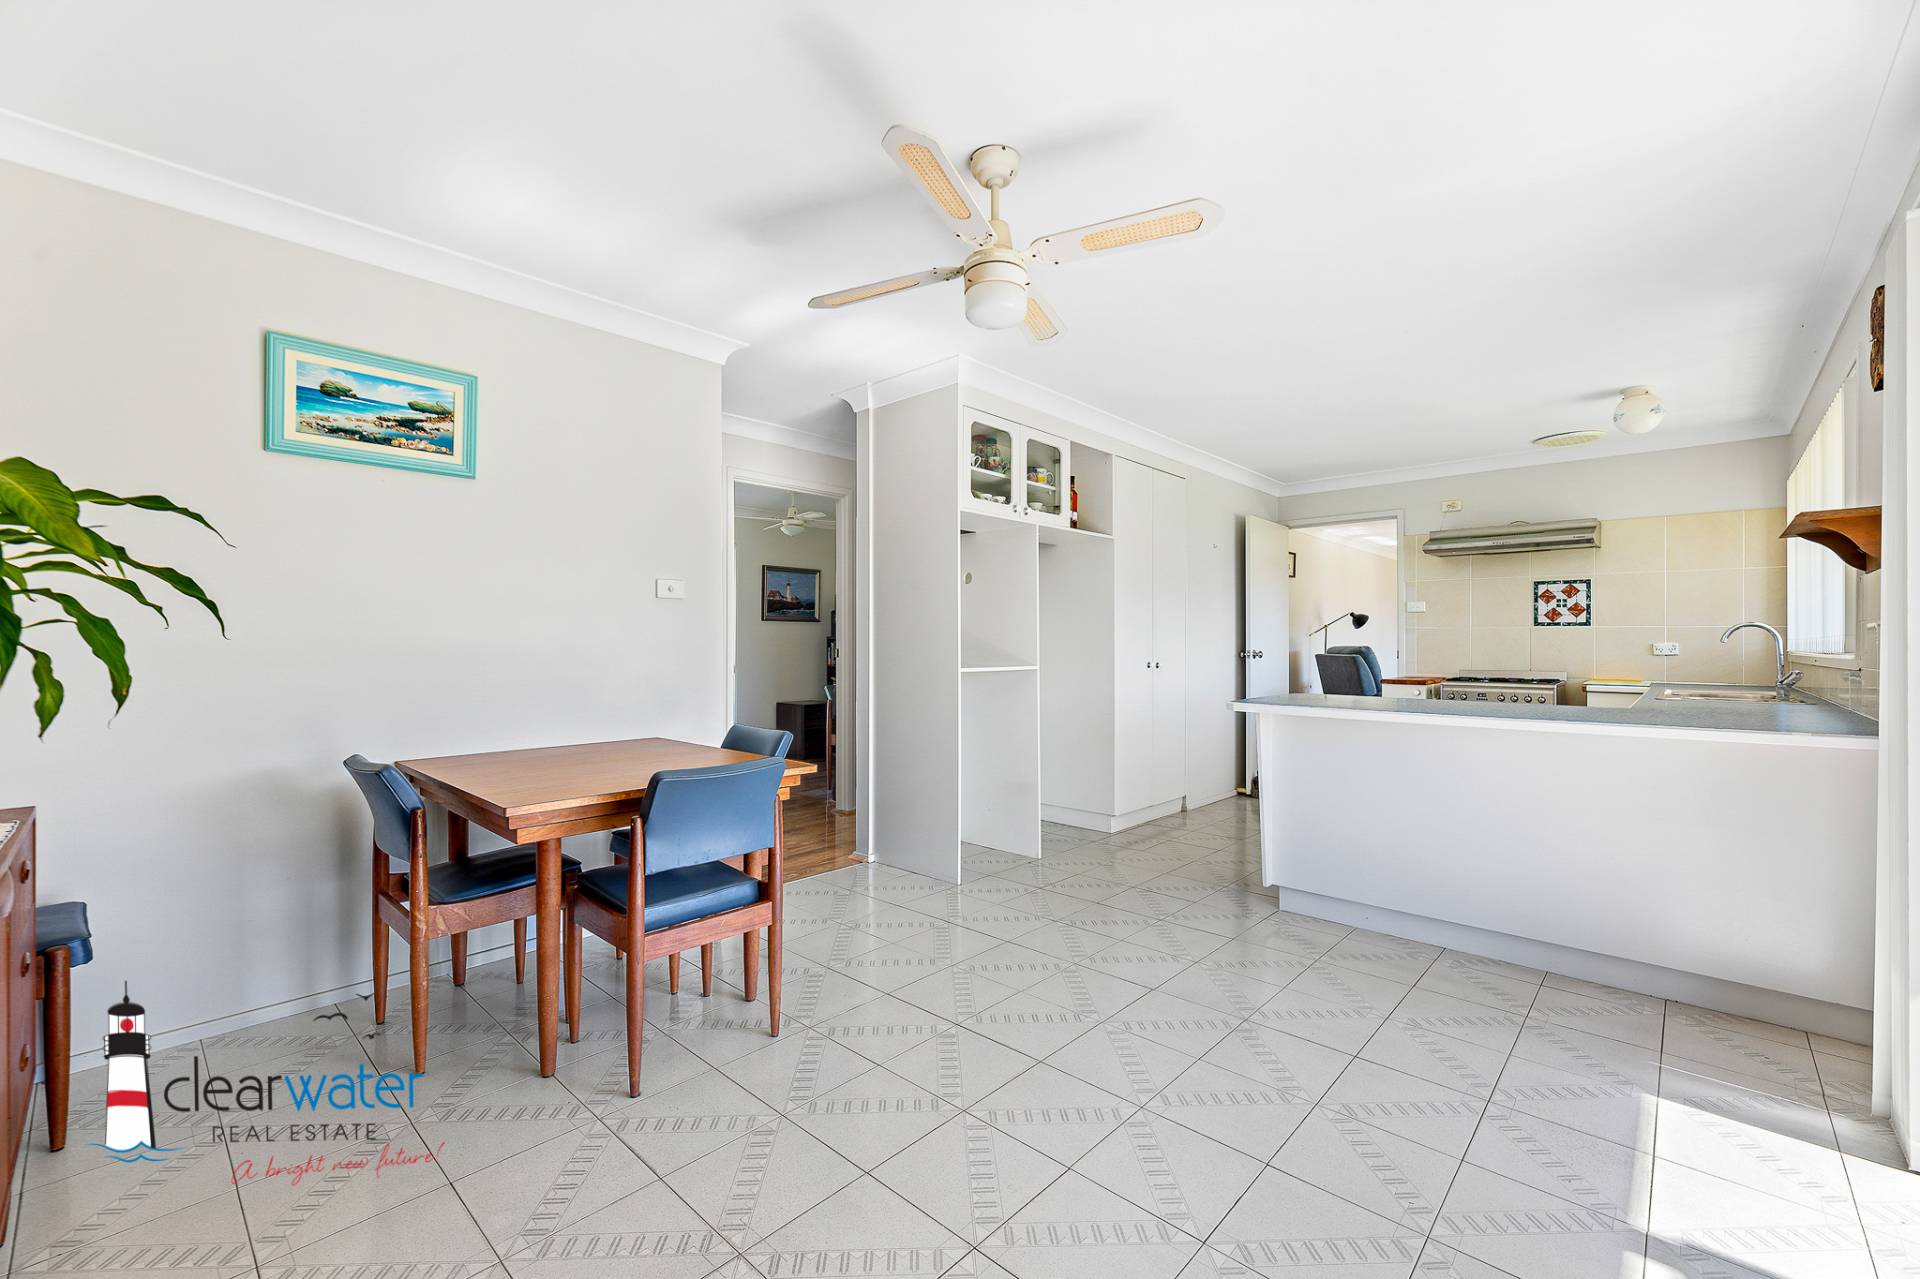 Clearwater Real Estate - 3 Bedroom Home with Garage @ Tuross